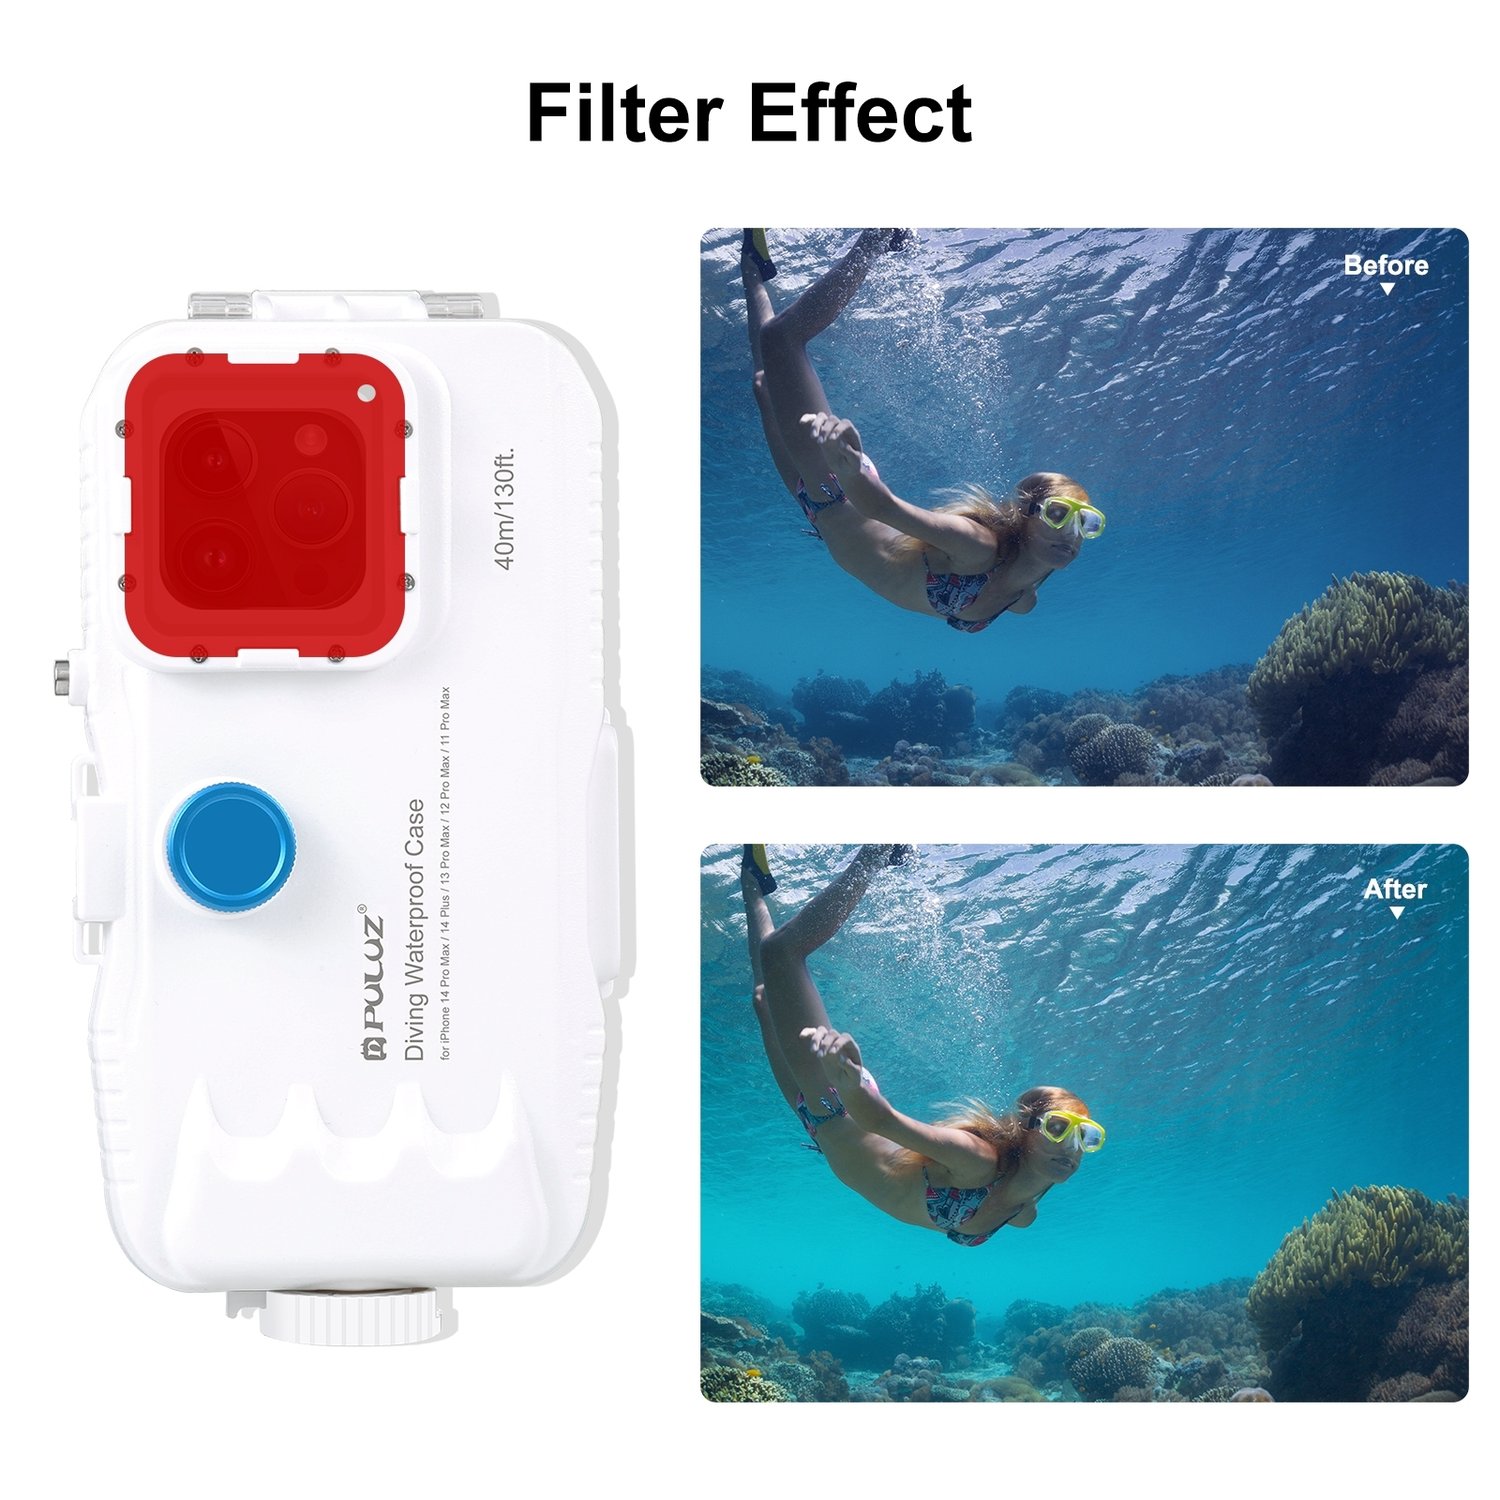 Underwater diving case for iPhone